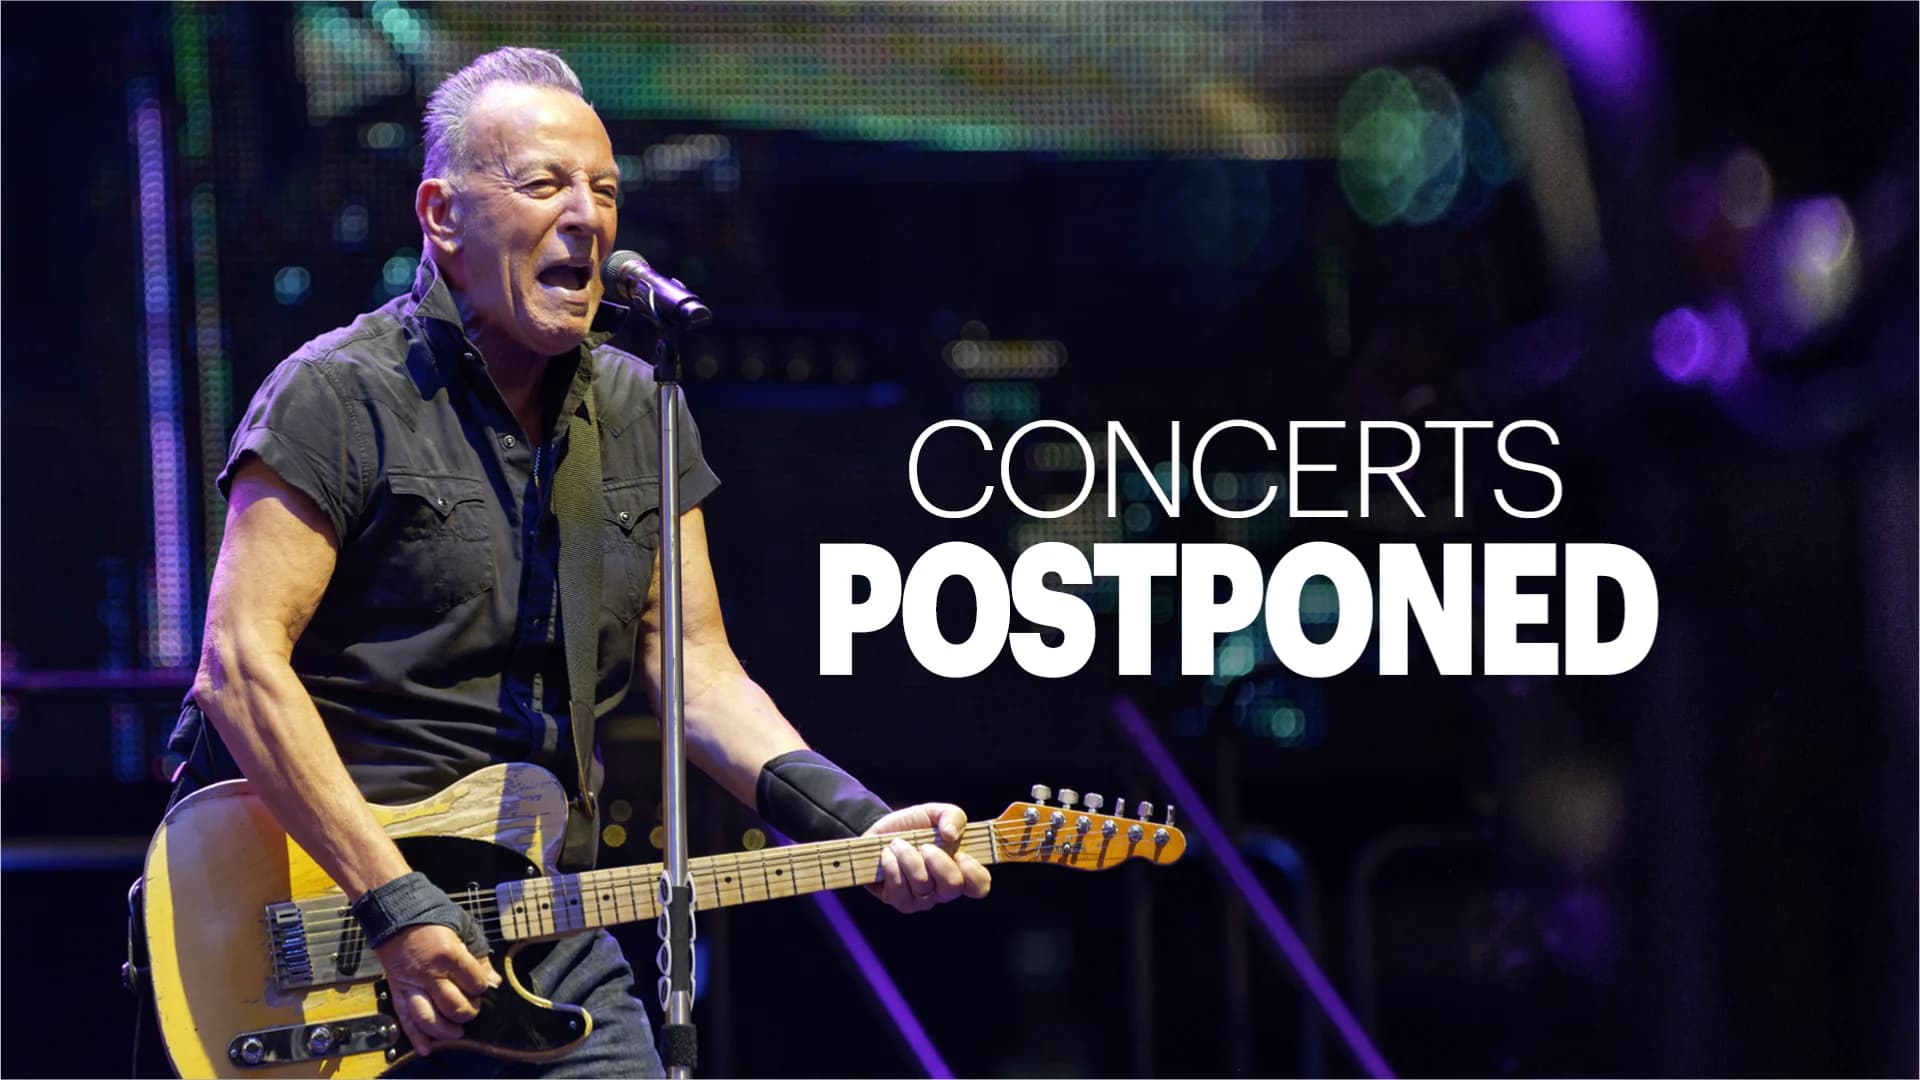 E Street Band shows in Philadelphia postponed after Springsteen announces illness